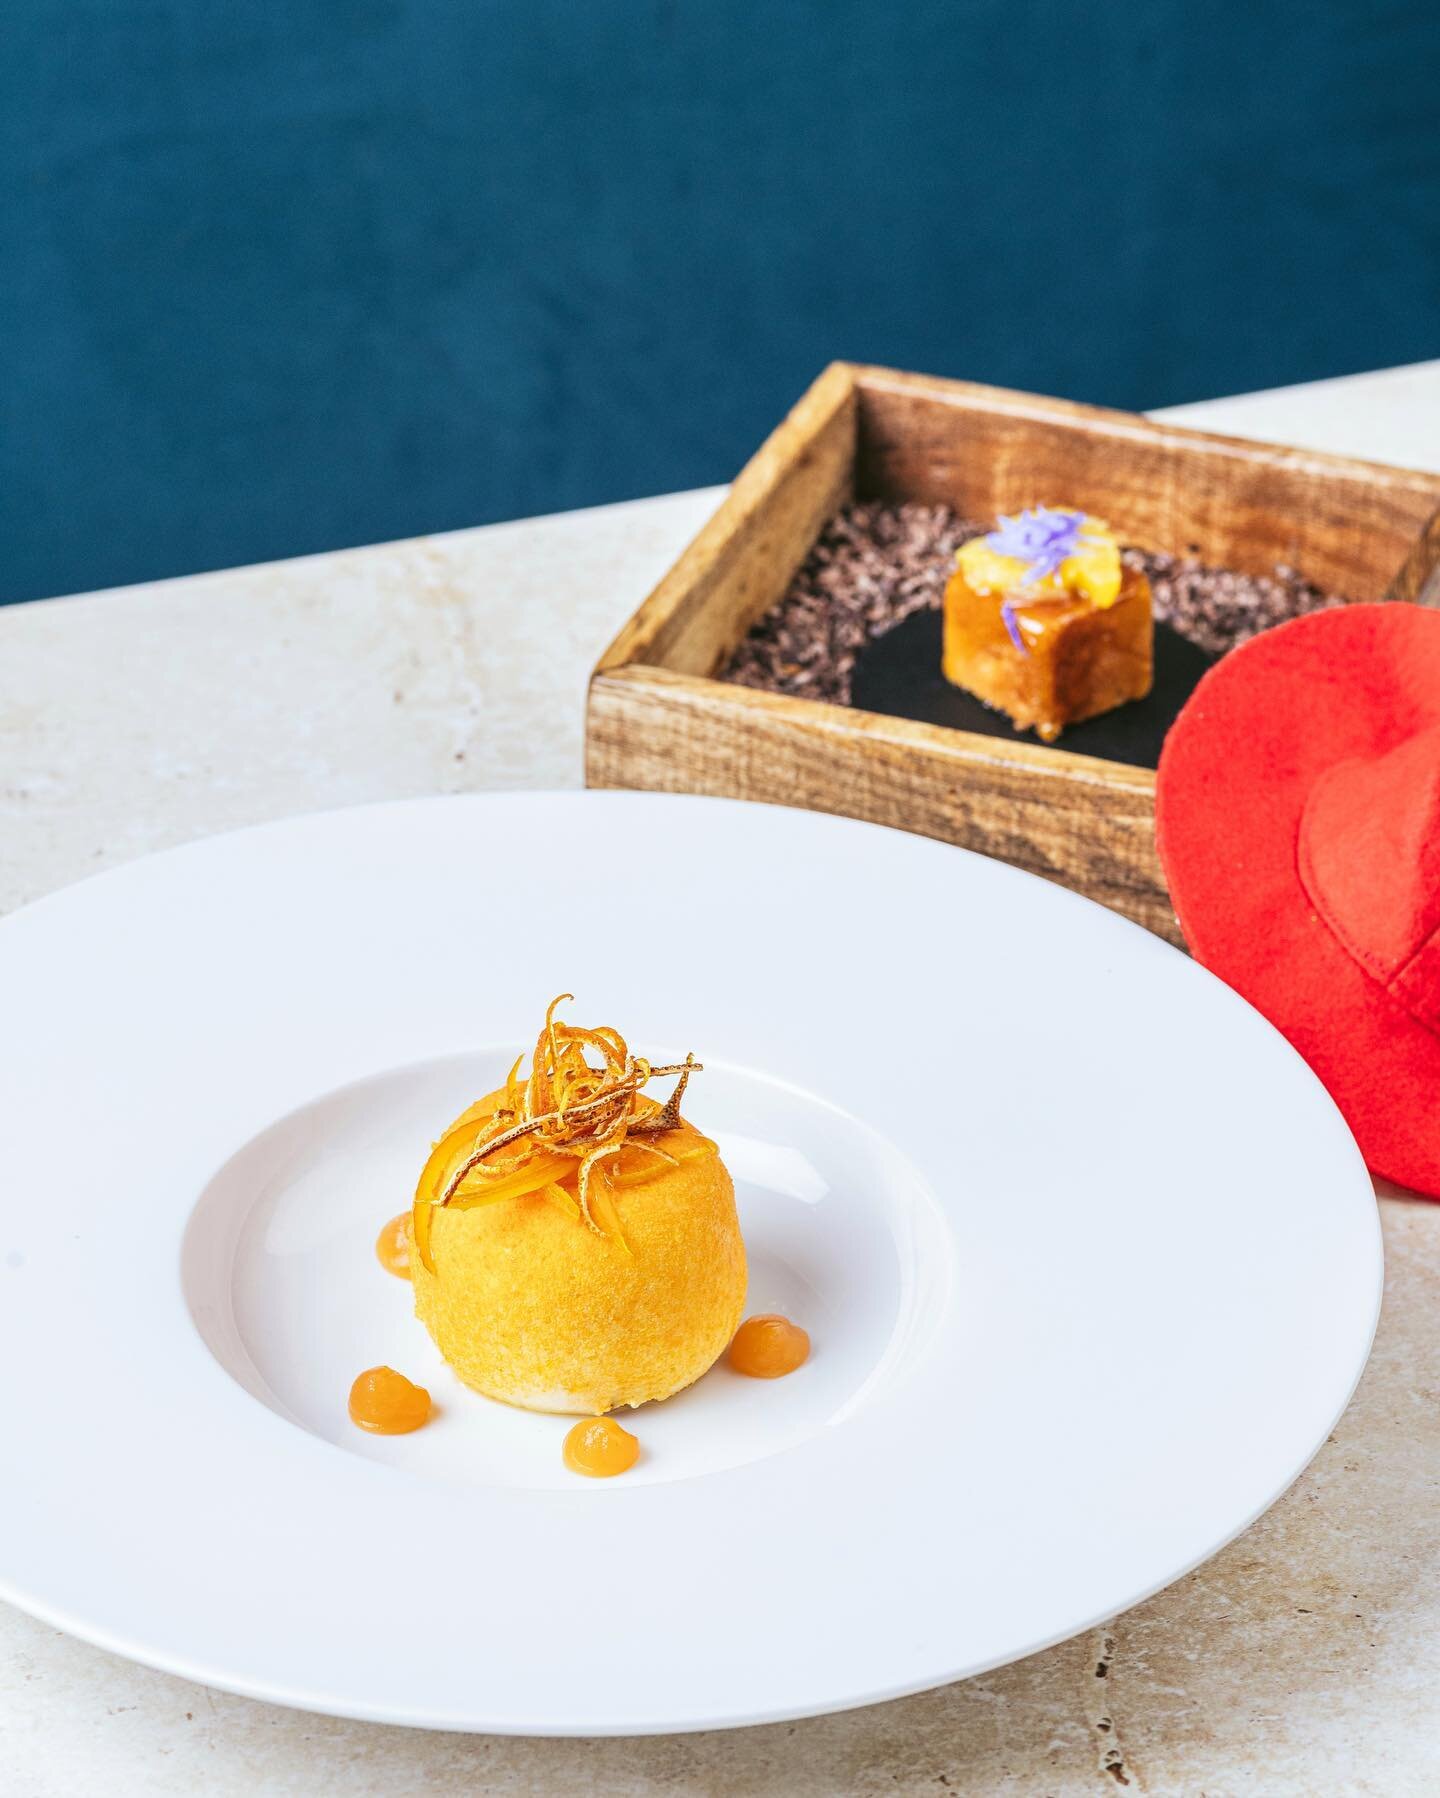 Introducing Our Paddington - Orange Marmalade &amp; Rum Baba Dessert! 🧸🍊

Embark on a nostalgic journey with us on our fourth stop of the Bakeloo Line inspired by childhood memories. 

Book now - www.theploughkent.com

#finediningram #professionalc